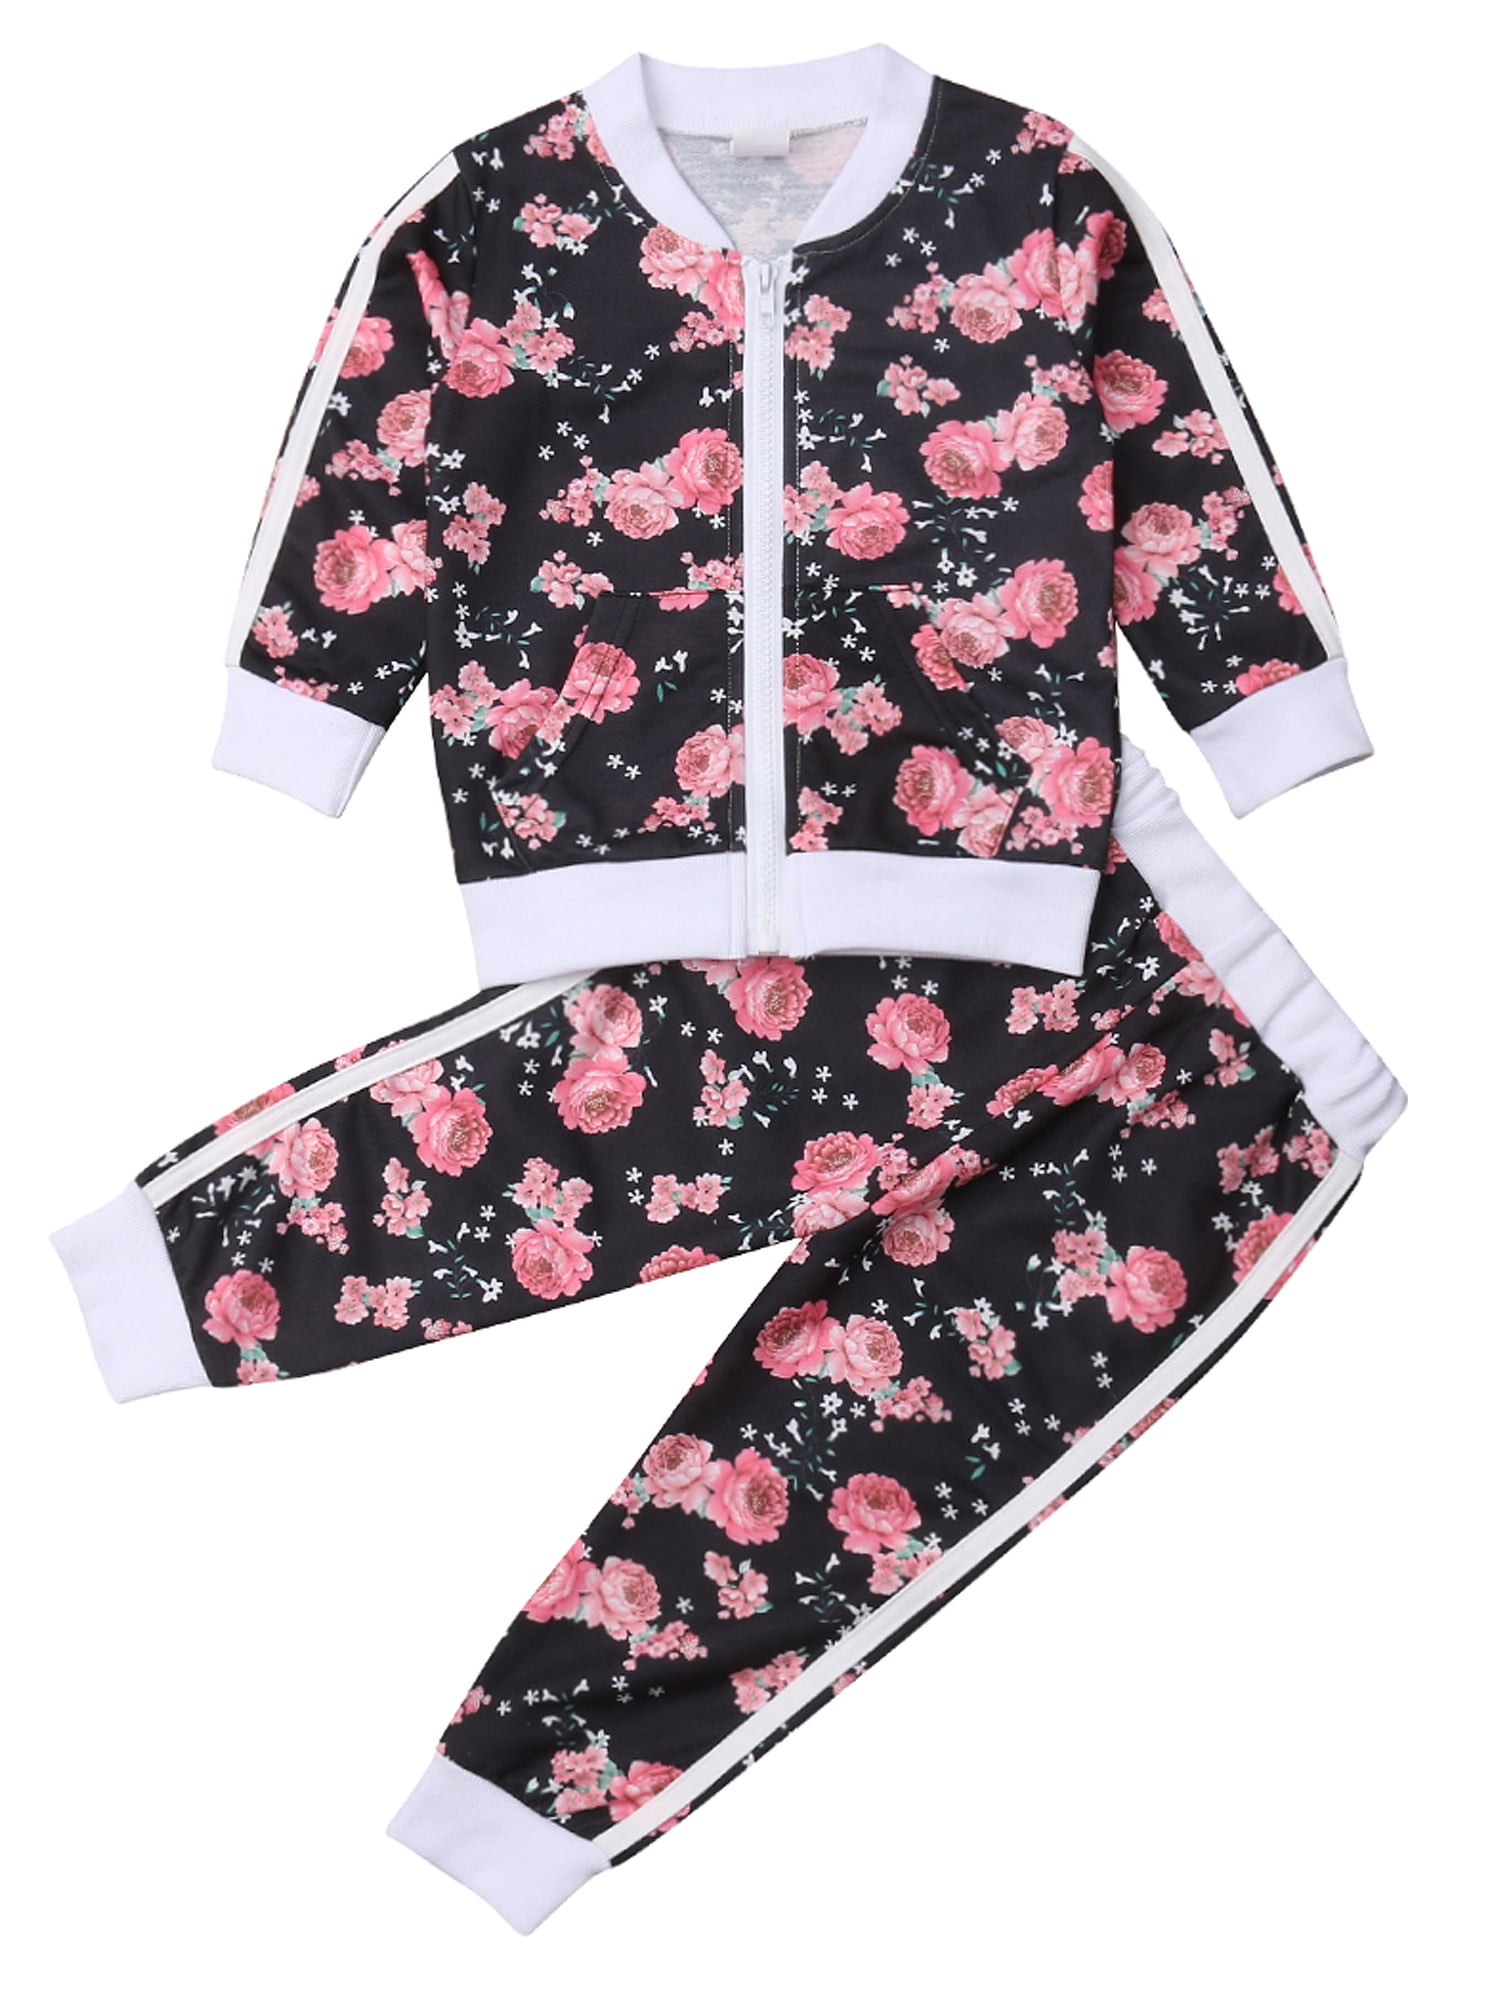 Lataw Newborn Baby Kids Sweatsuit Girls Hooded Letter Sweatsuit Floral Pants Playsuit Outfit Set 